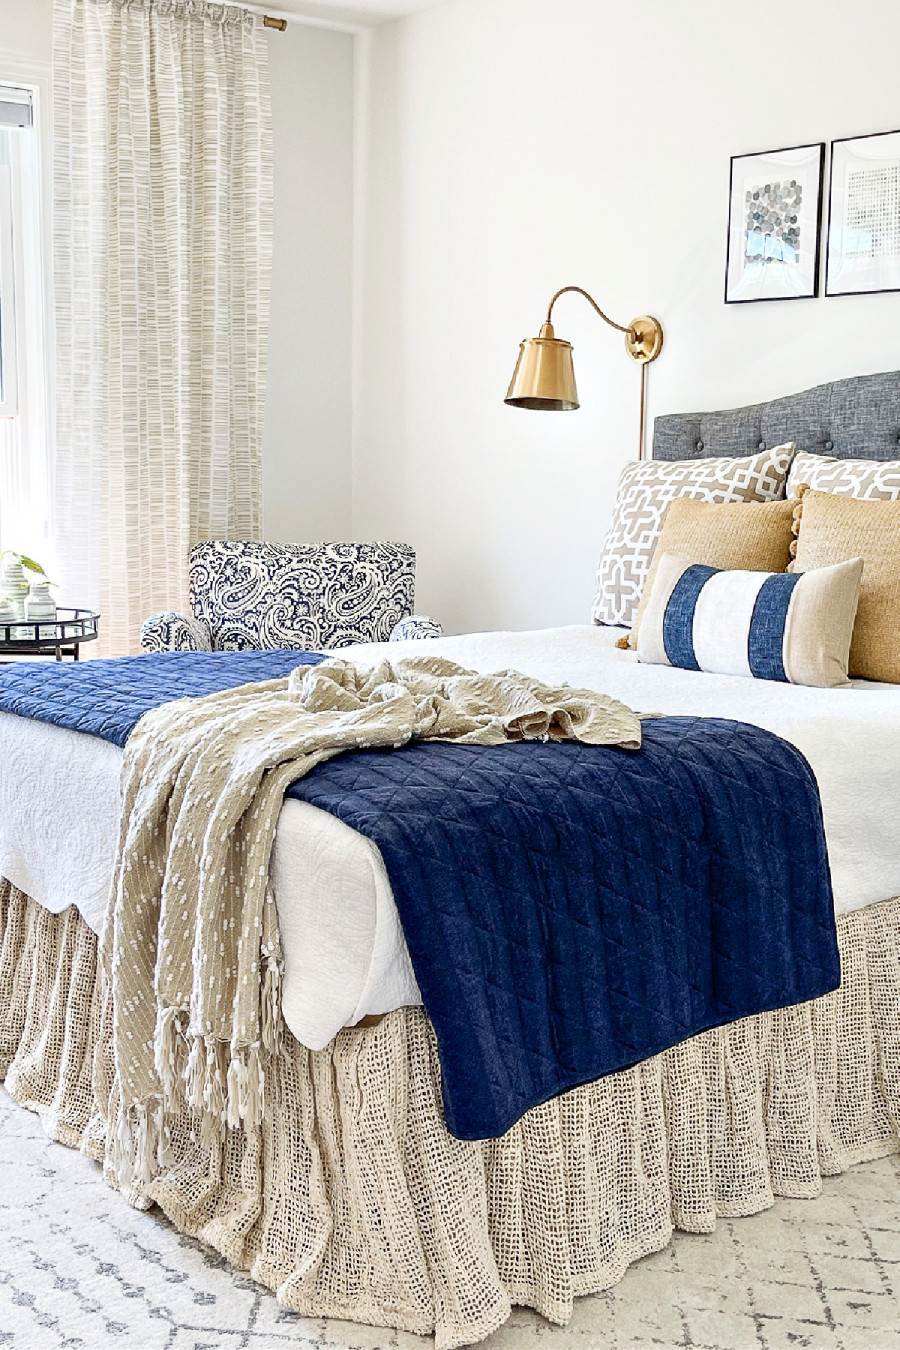 SUMMER GUEST BEDROOM TOUR AND INSPIRATION